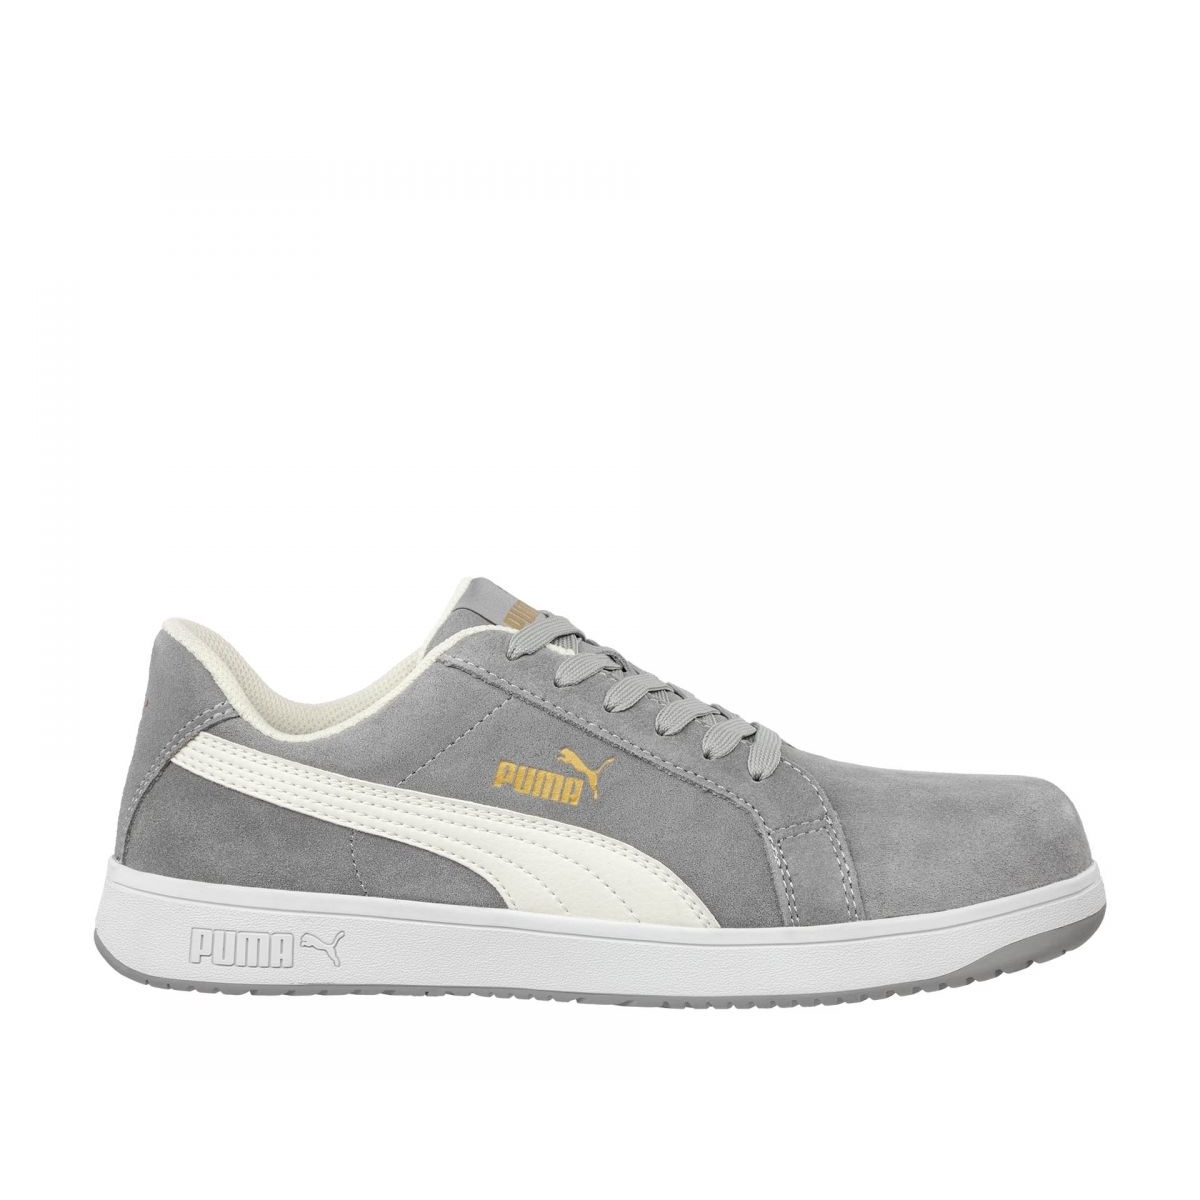 PUMA Safety Men's Iconic Low Composite Toe SD Work Shoes Grey Suede - 640035 Grey - Grey, 9